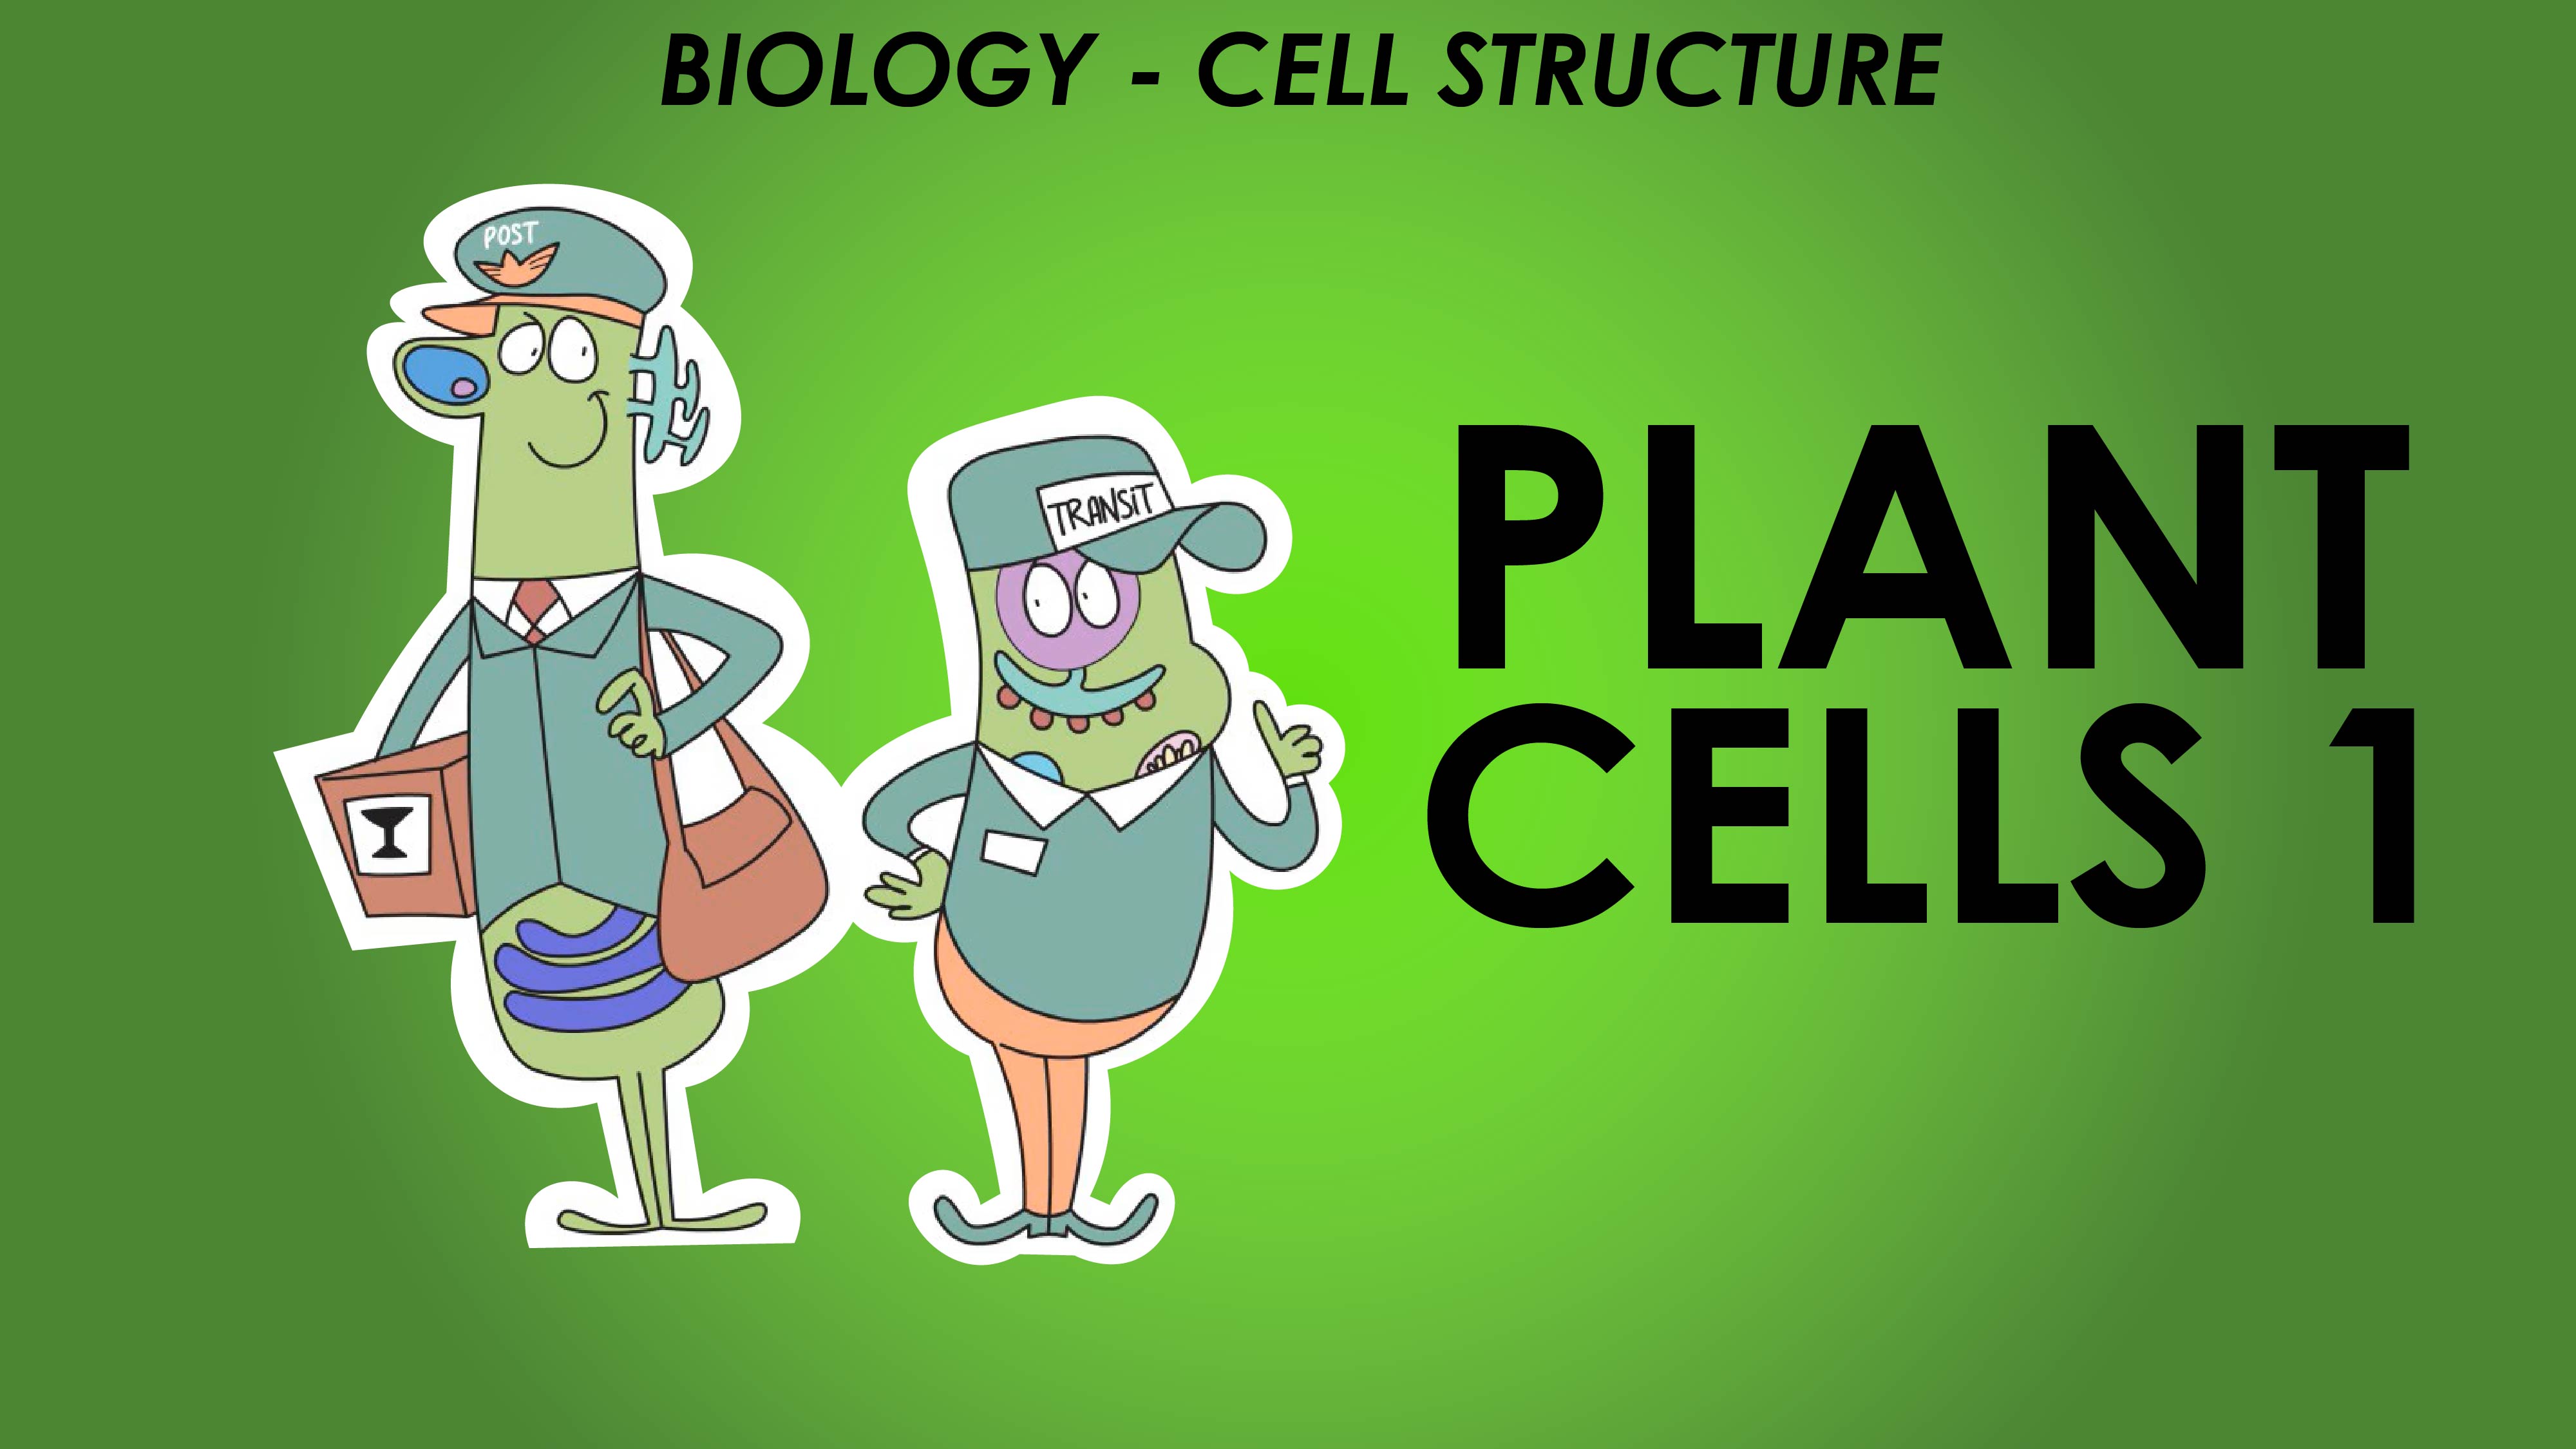 Plant Cells 1 - Cell Structure